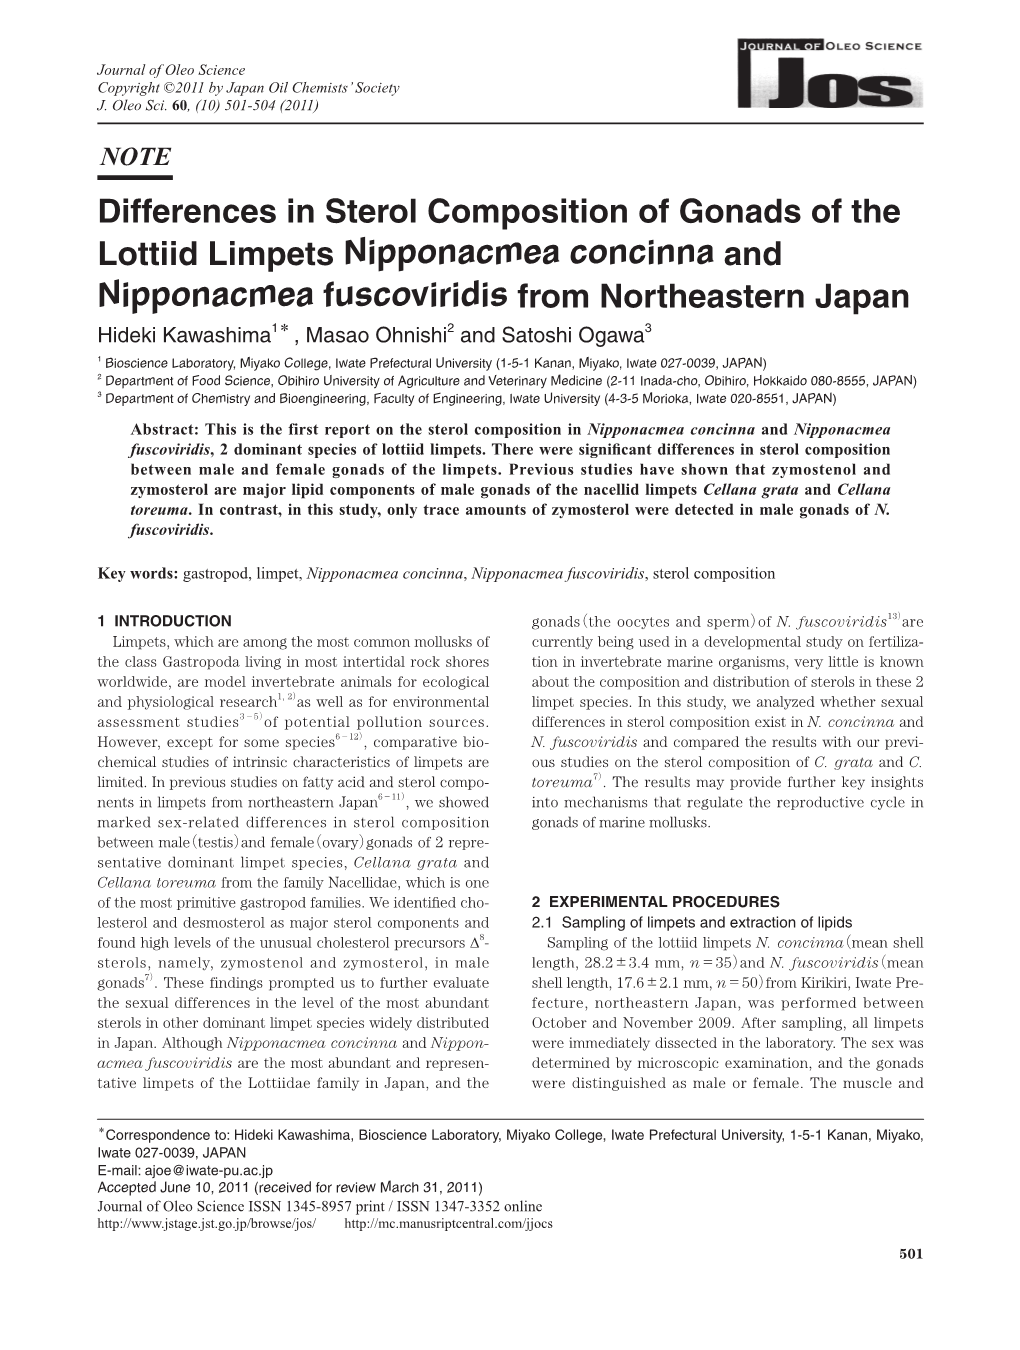 Differences in Sterol Composition of Gonads of the Lottiid Limpets